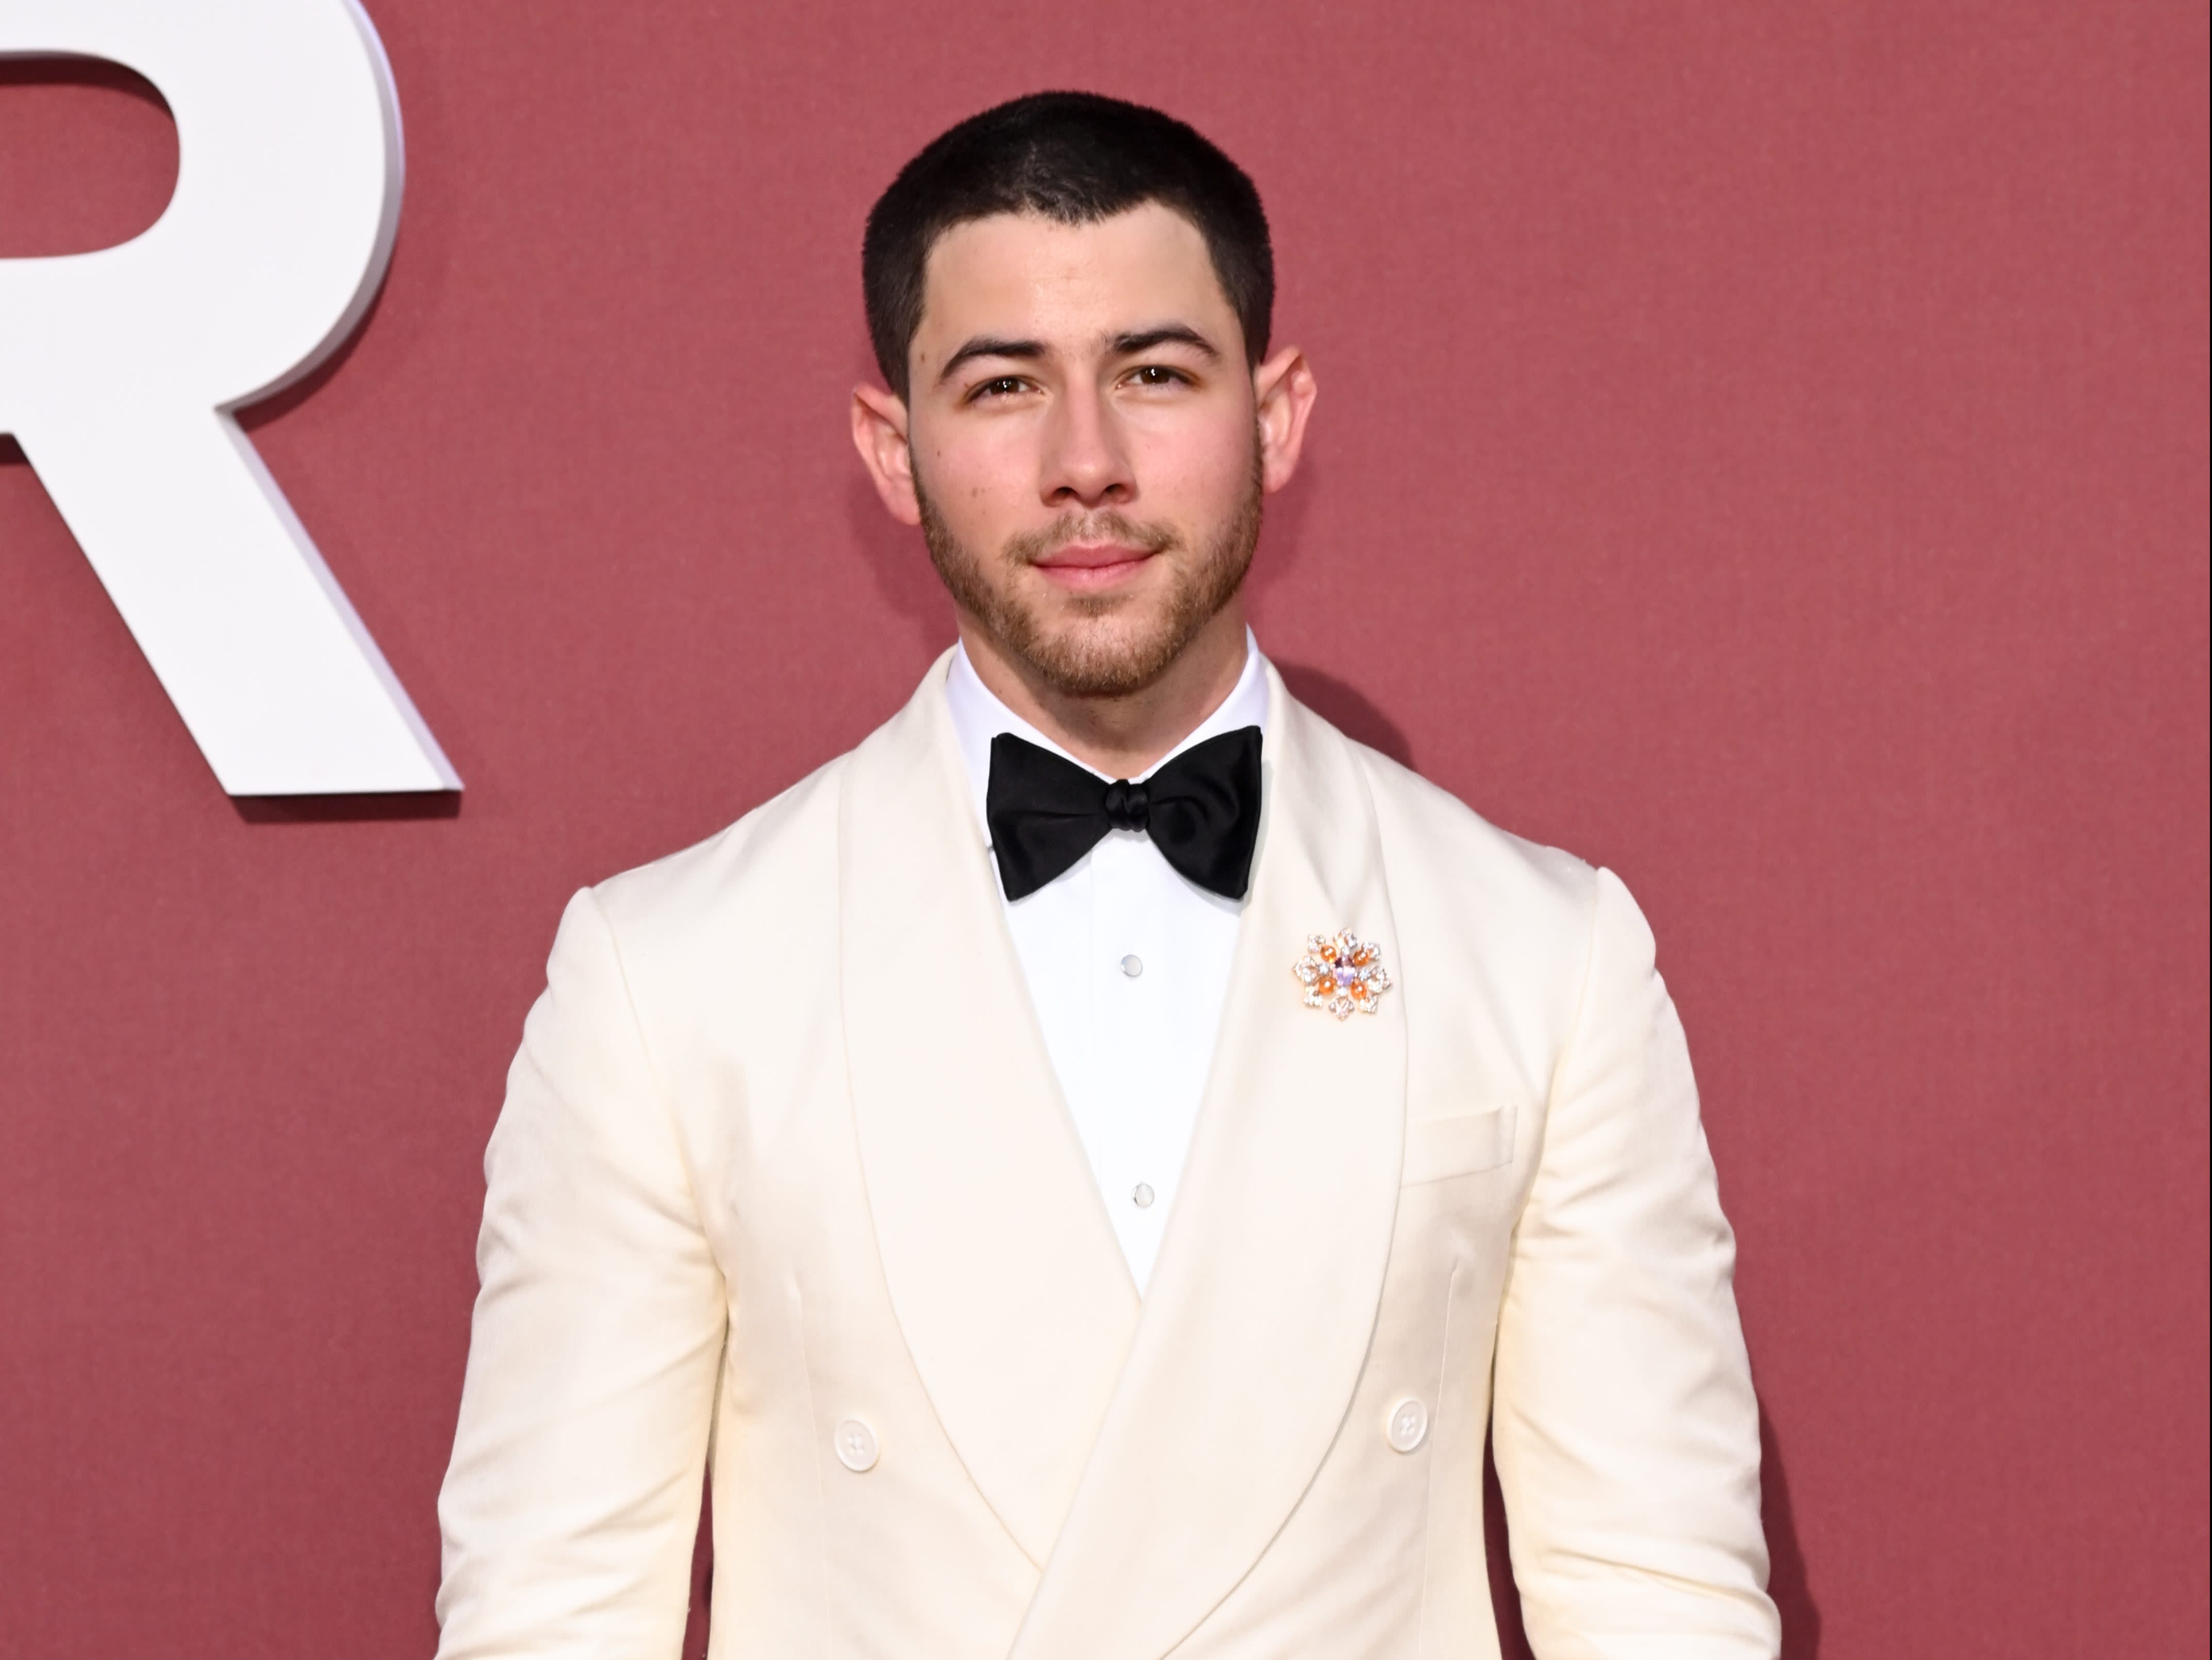 Nick Jonas Makes Dad Mode Look So Cool in the Sweetest New Photo With Daughter Malti